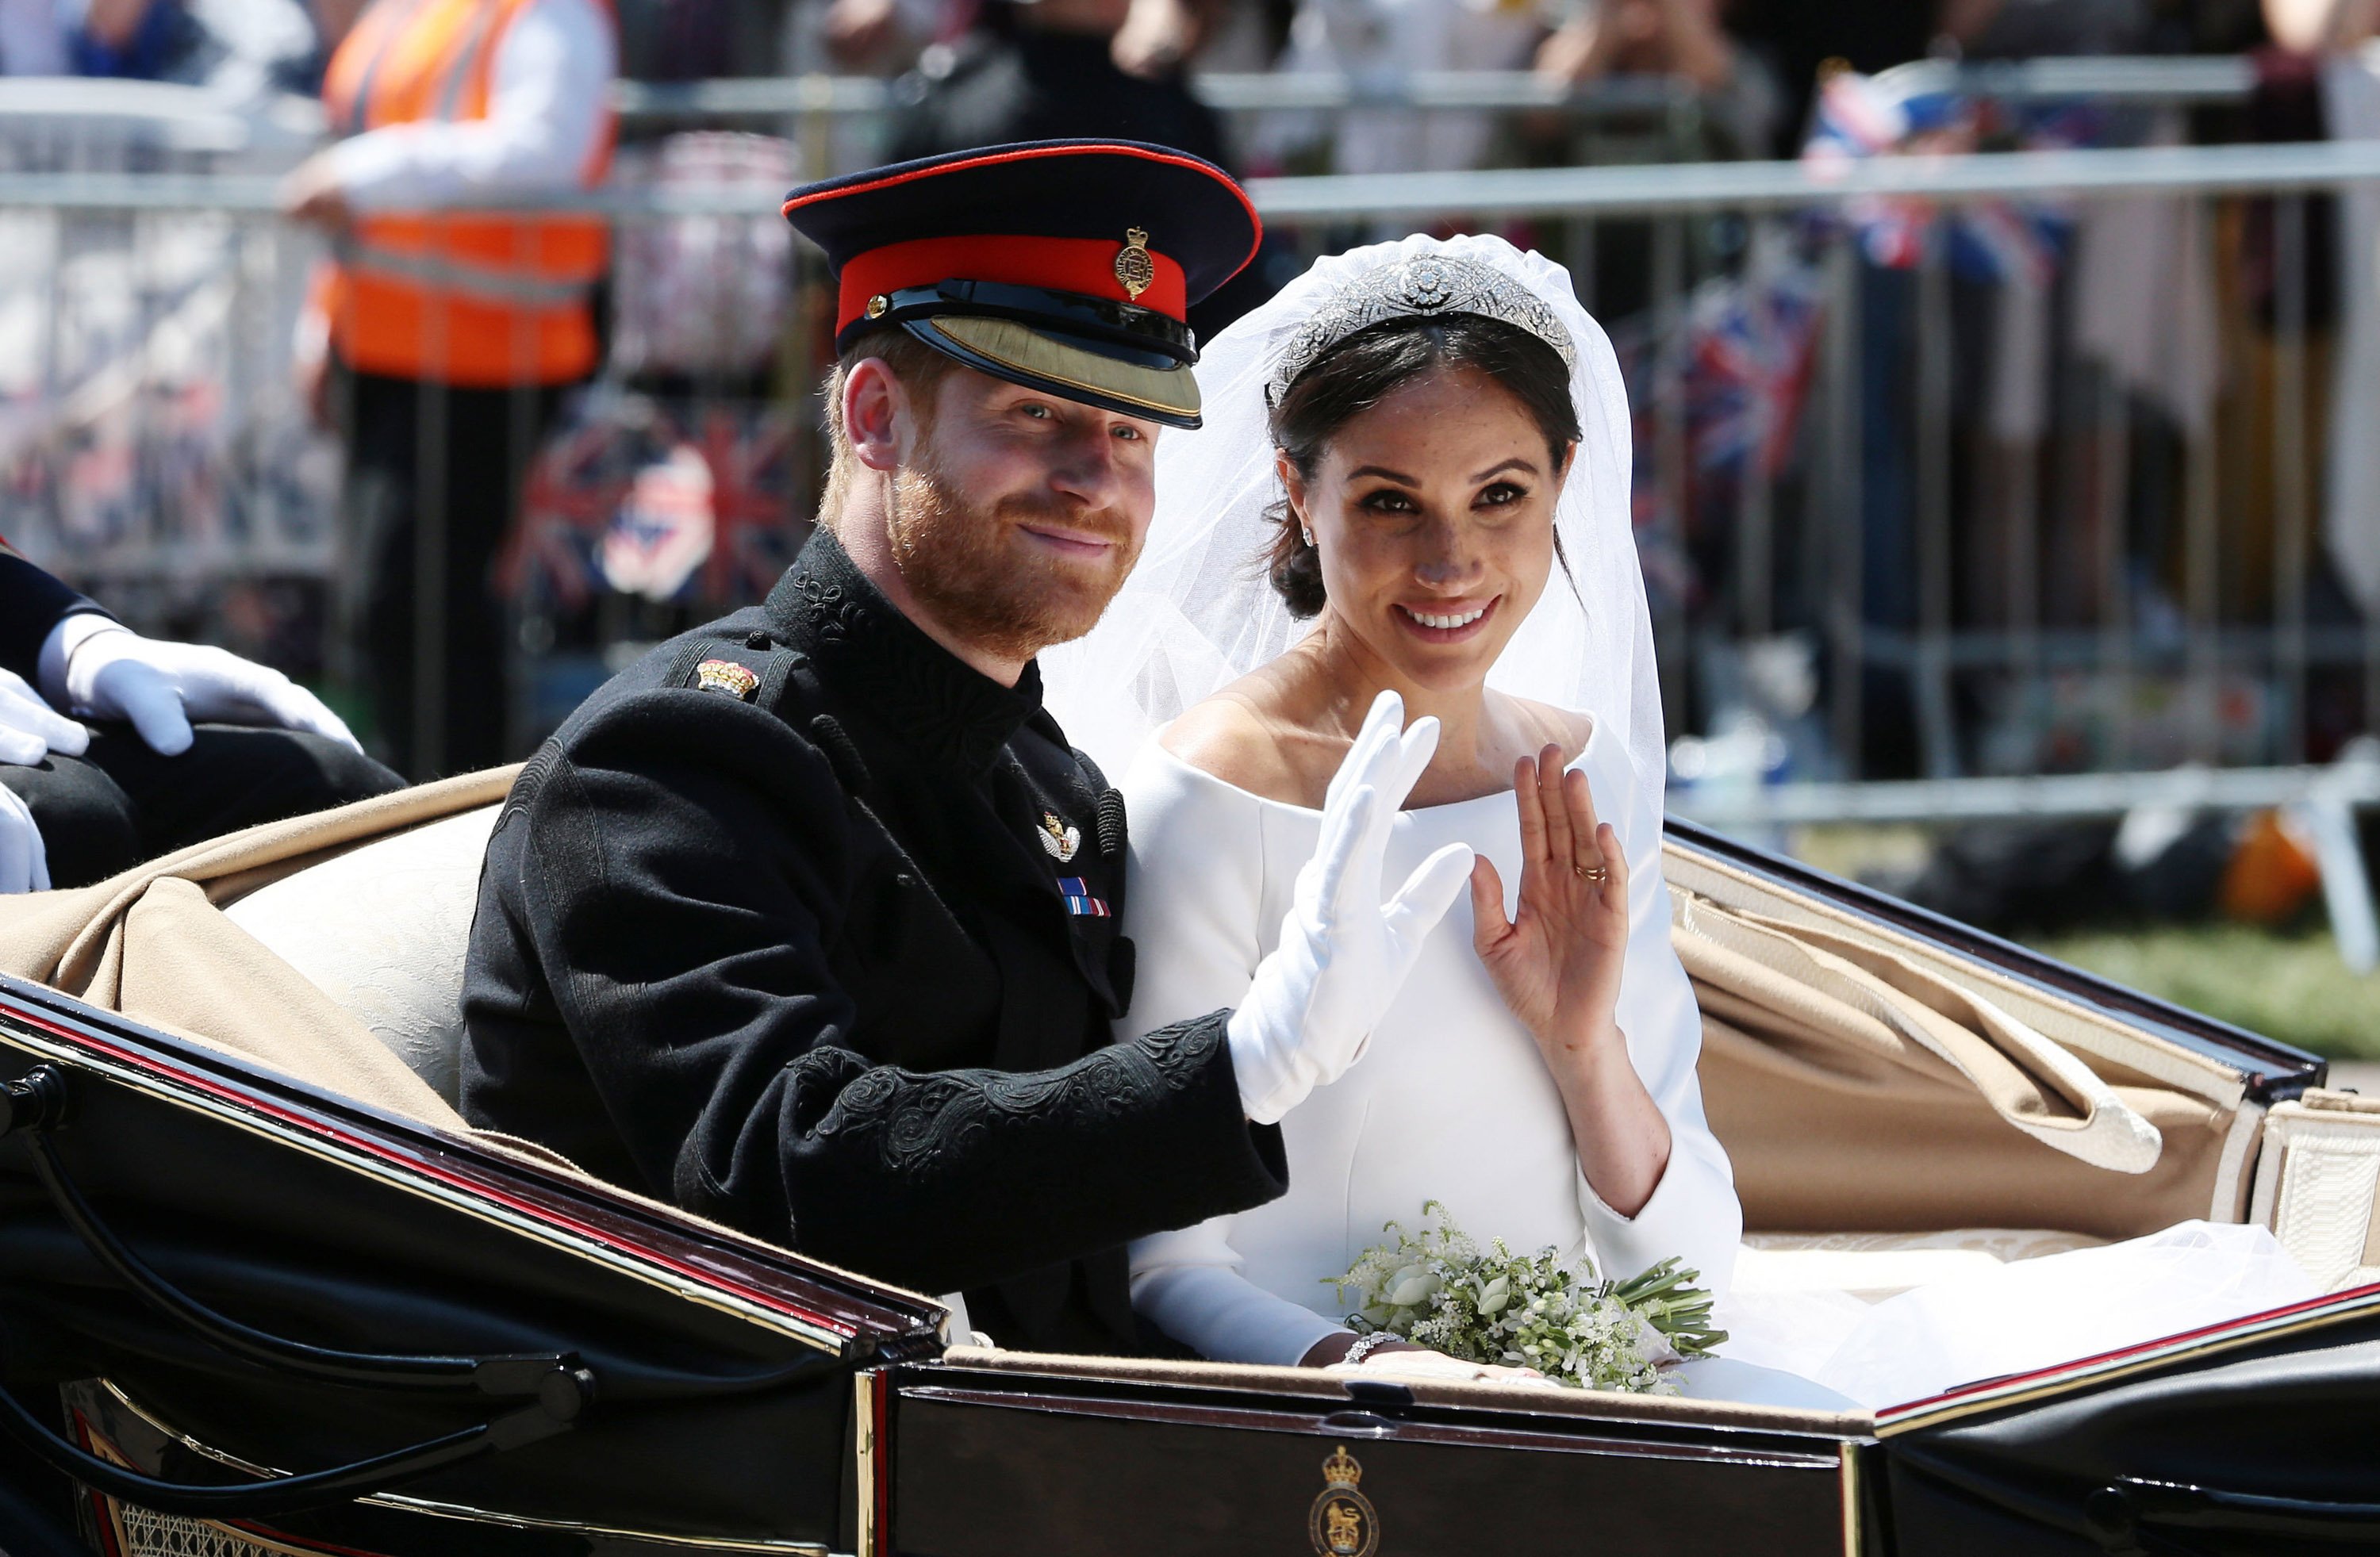 Prince Harry, Duke of Sussex and Meghan, Duchess of Sussex wave from the Ascot Landau Carriage during their carriage procession on Castle Hill outside Windsor Castle in Windsor, on May 19, 2018 after their wedding ceremony. | Source: Getty Images